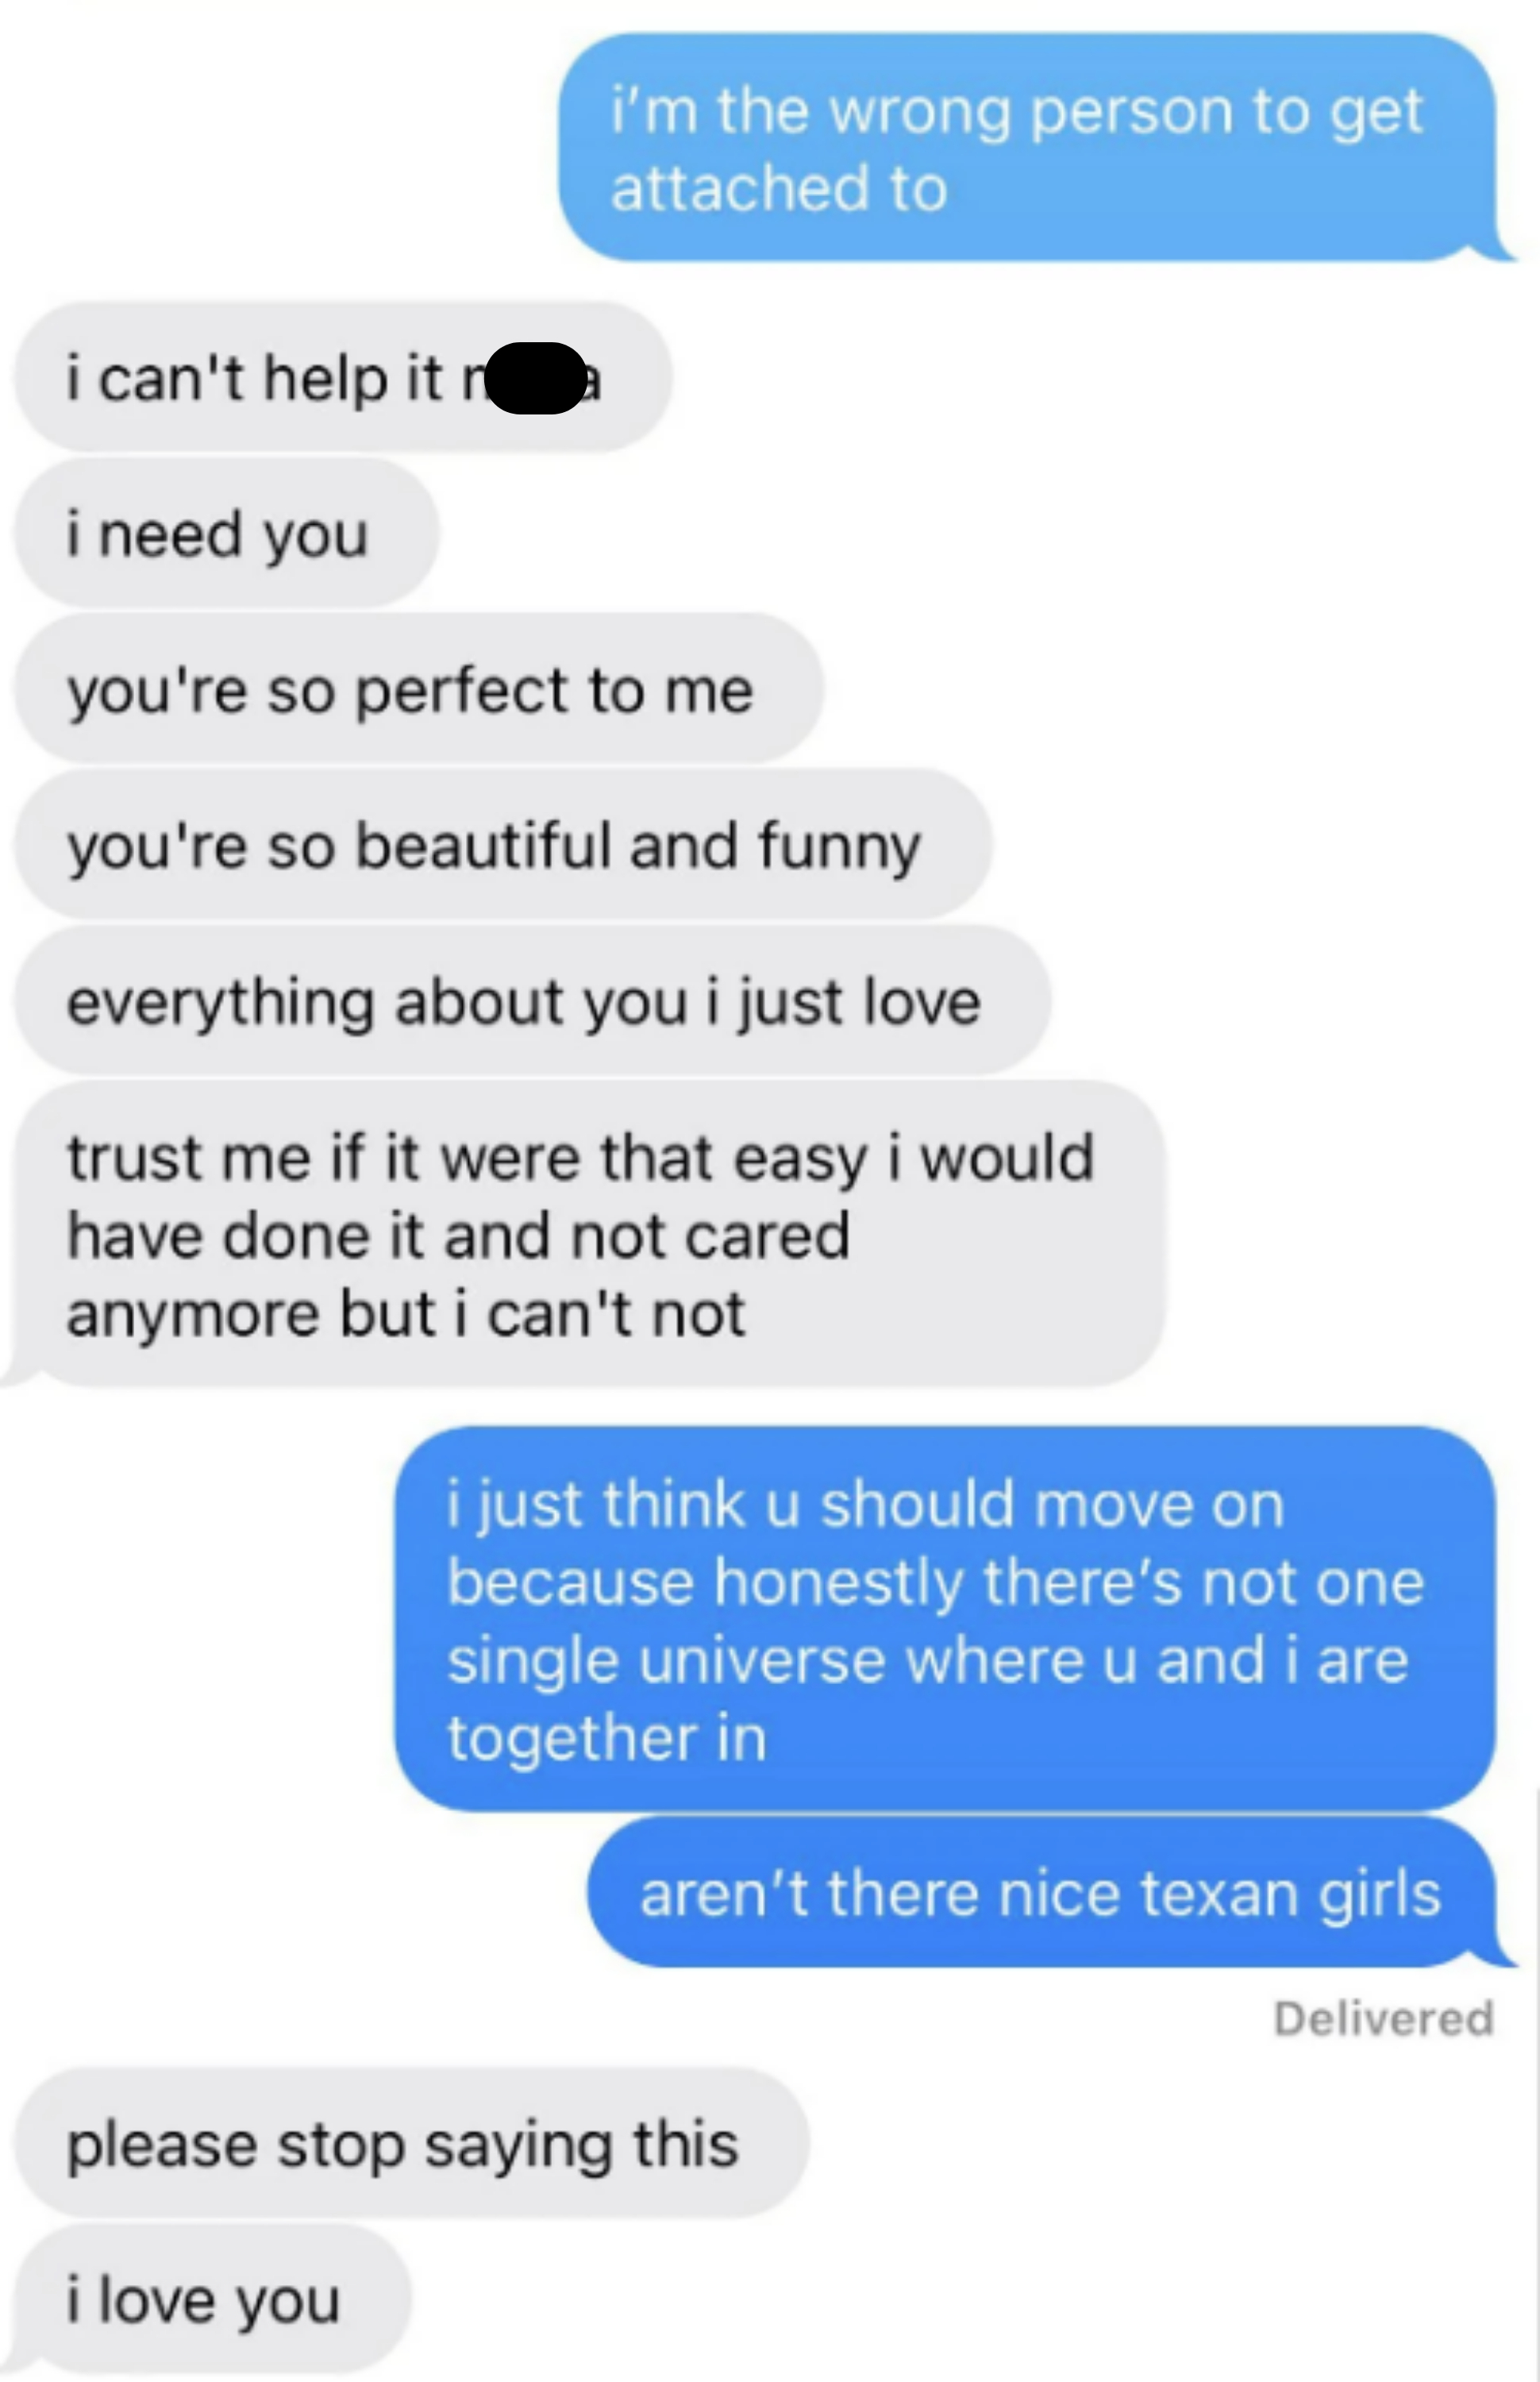 &quot;I need you, you&#x27;re so perfect to me, you&#x27;re so beautiful and funny&quot;; &quot;I just think u should move on because there&#x27;s not one universe where u and I are together; aren&#x27;t there nice Texan girls?&quot; &quot;please stop saying this, I love you&quot;